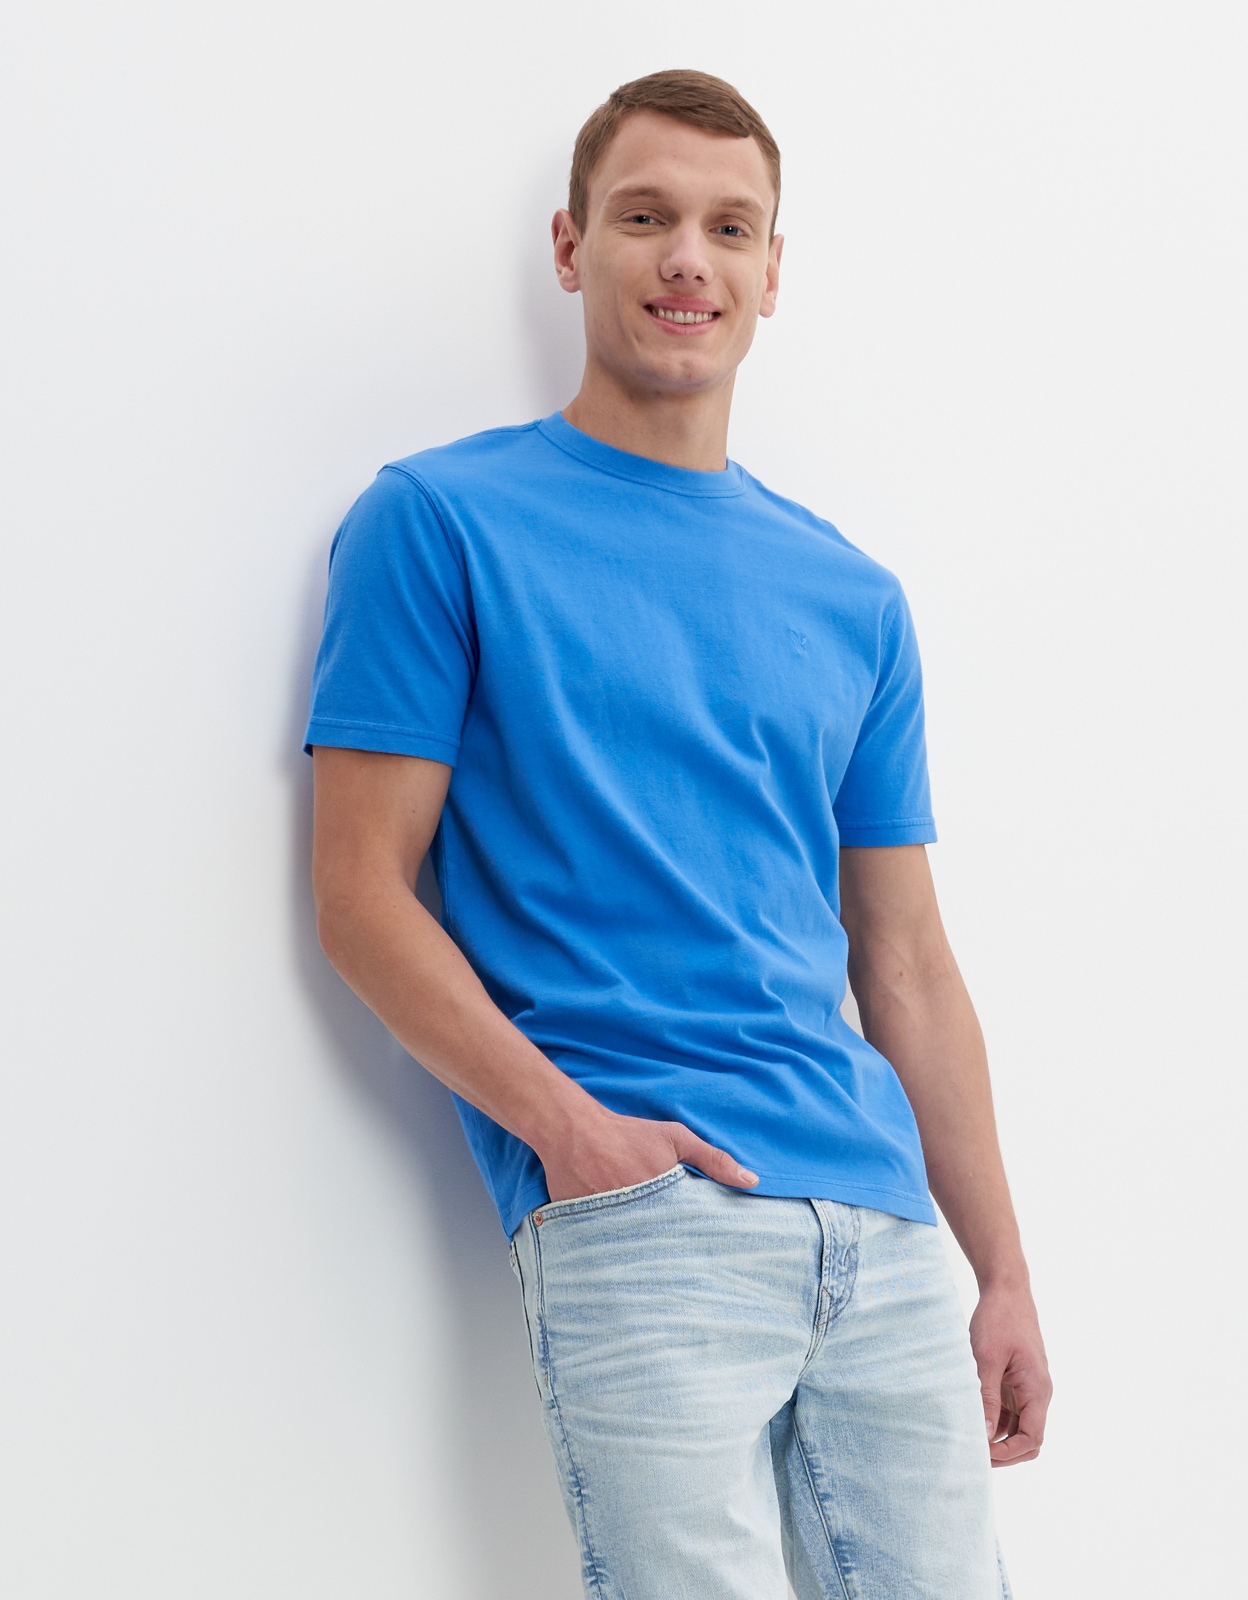 American Eagle Outfitters Men's T-Shirt - Blue - S